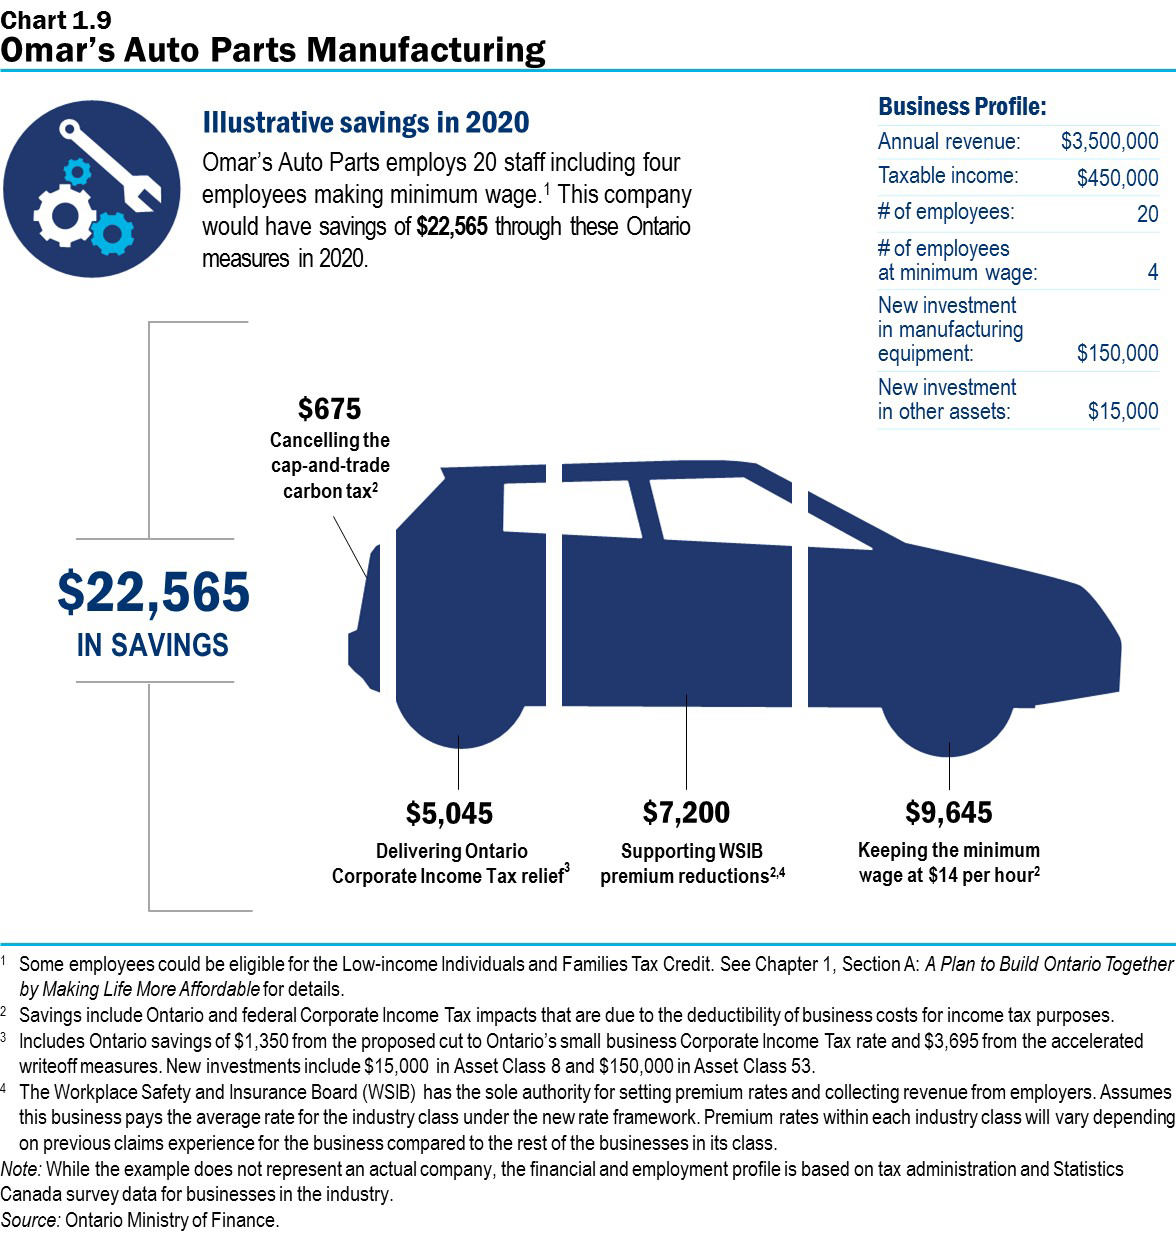 Chart 1.9: Omar’s Auto Parts Manufacturing